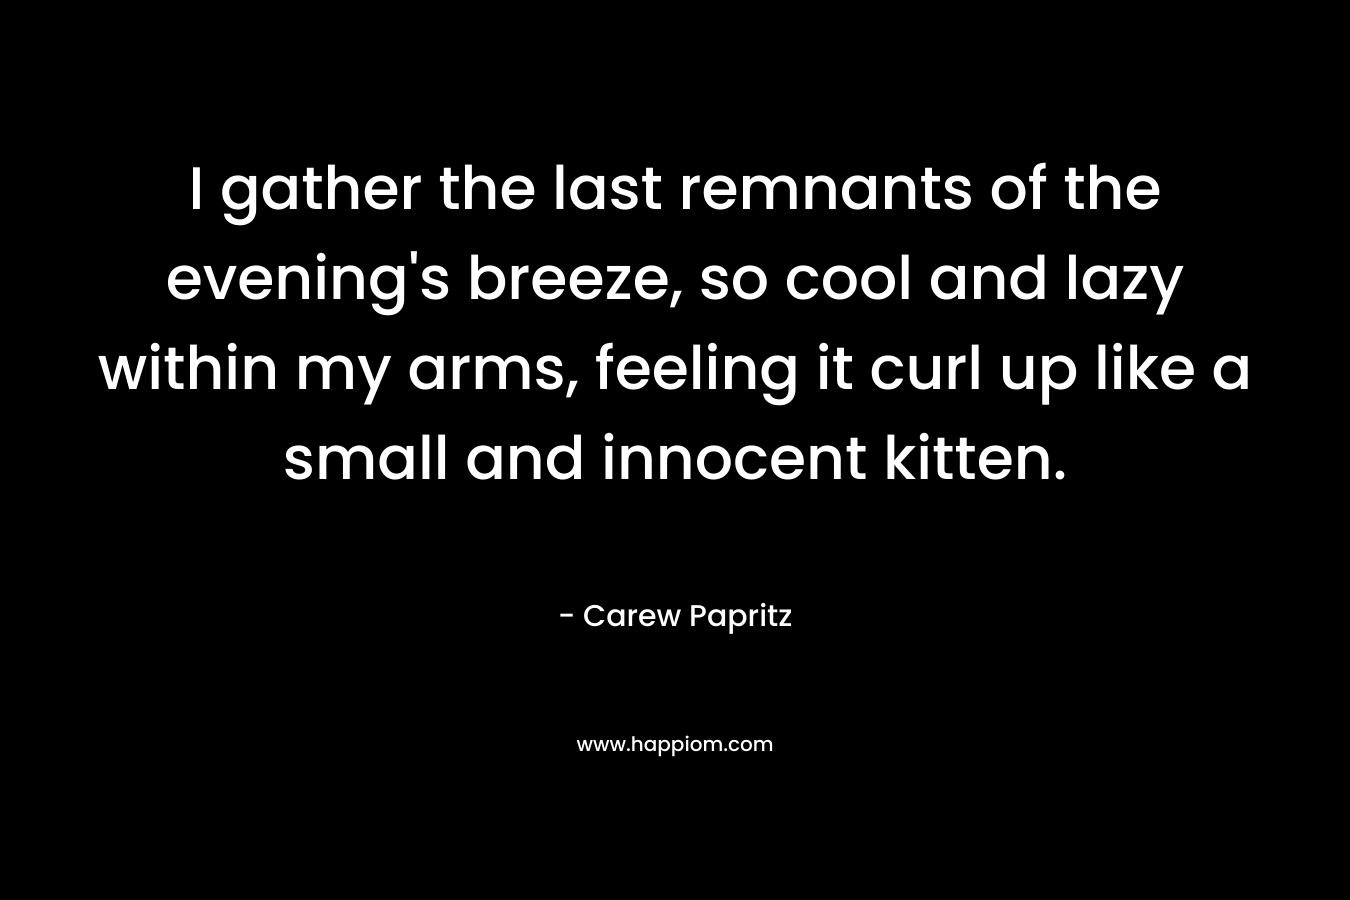 I gather the last remnants of the evening’s breeze, so cool and lazy within my arms, feeling it curl up like a small and innocent kitten. – Carew Papritz